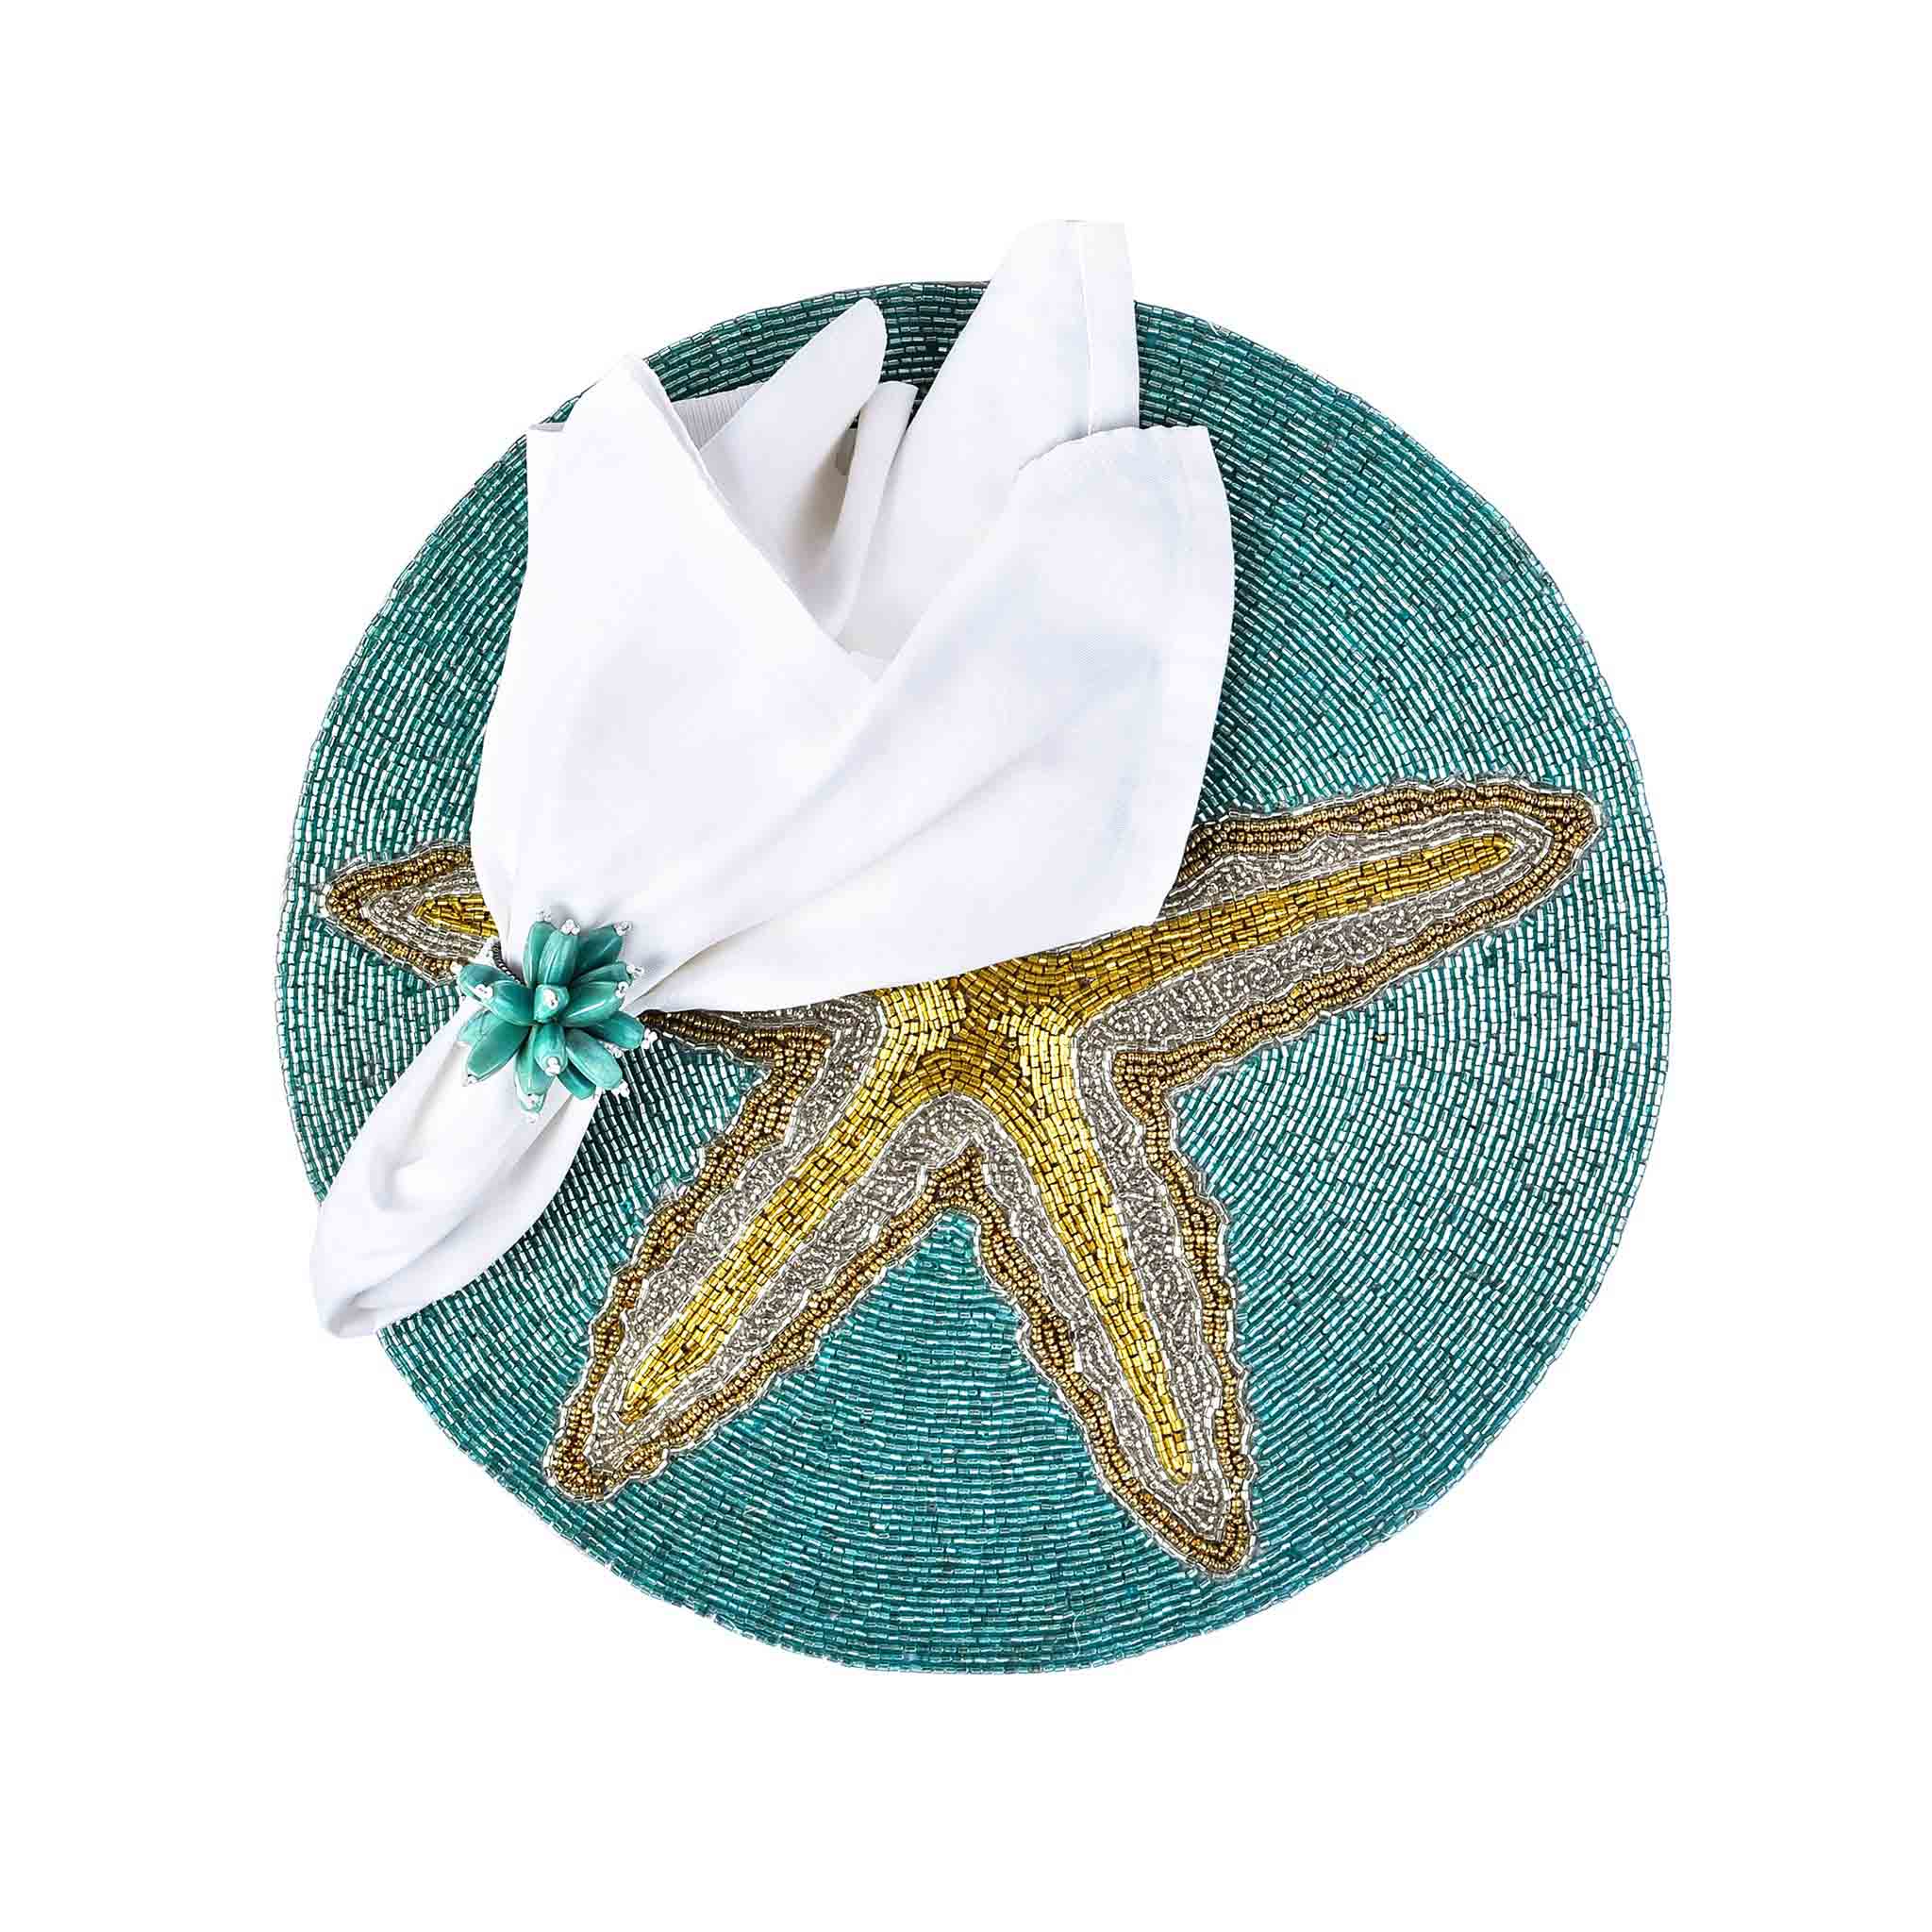 Ringo Star Fish Table Setting for 4 - Embroidered Placemats, Napkin Rings & Table Runner in Teal & Gold